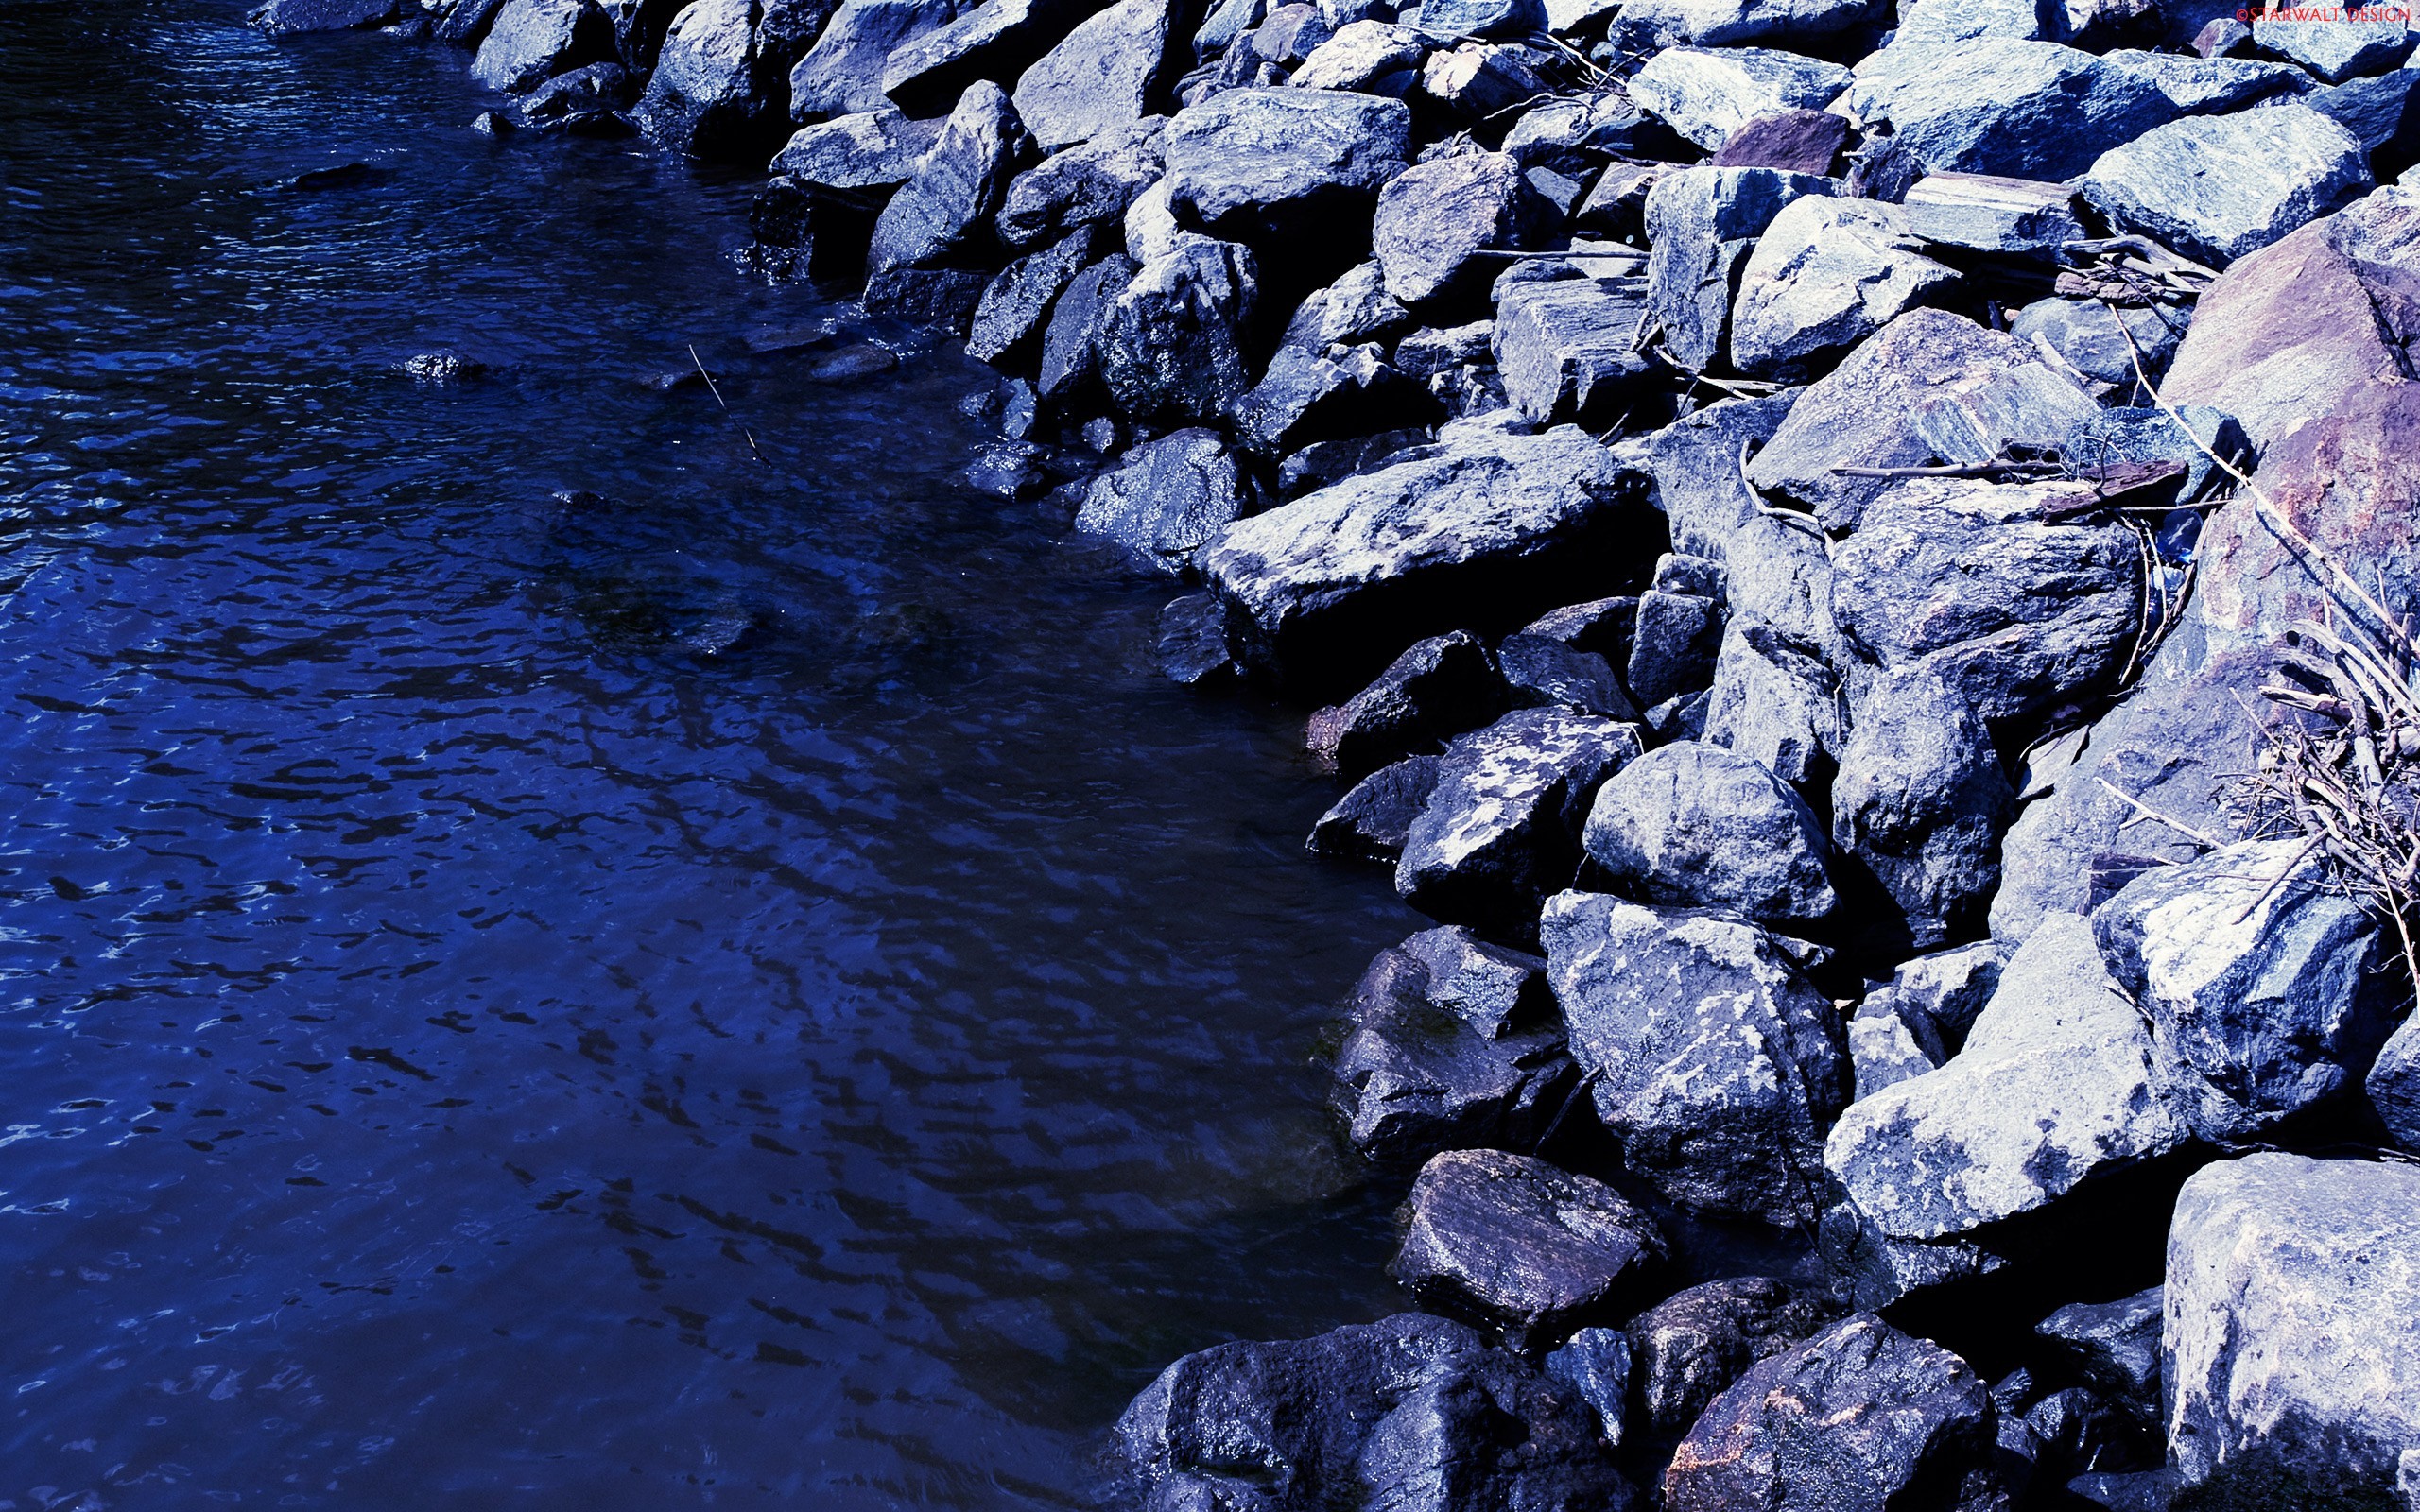 General 2560x1600 stones nature water blue rocks outdoors